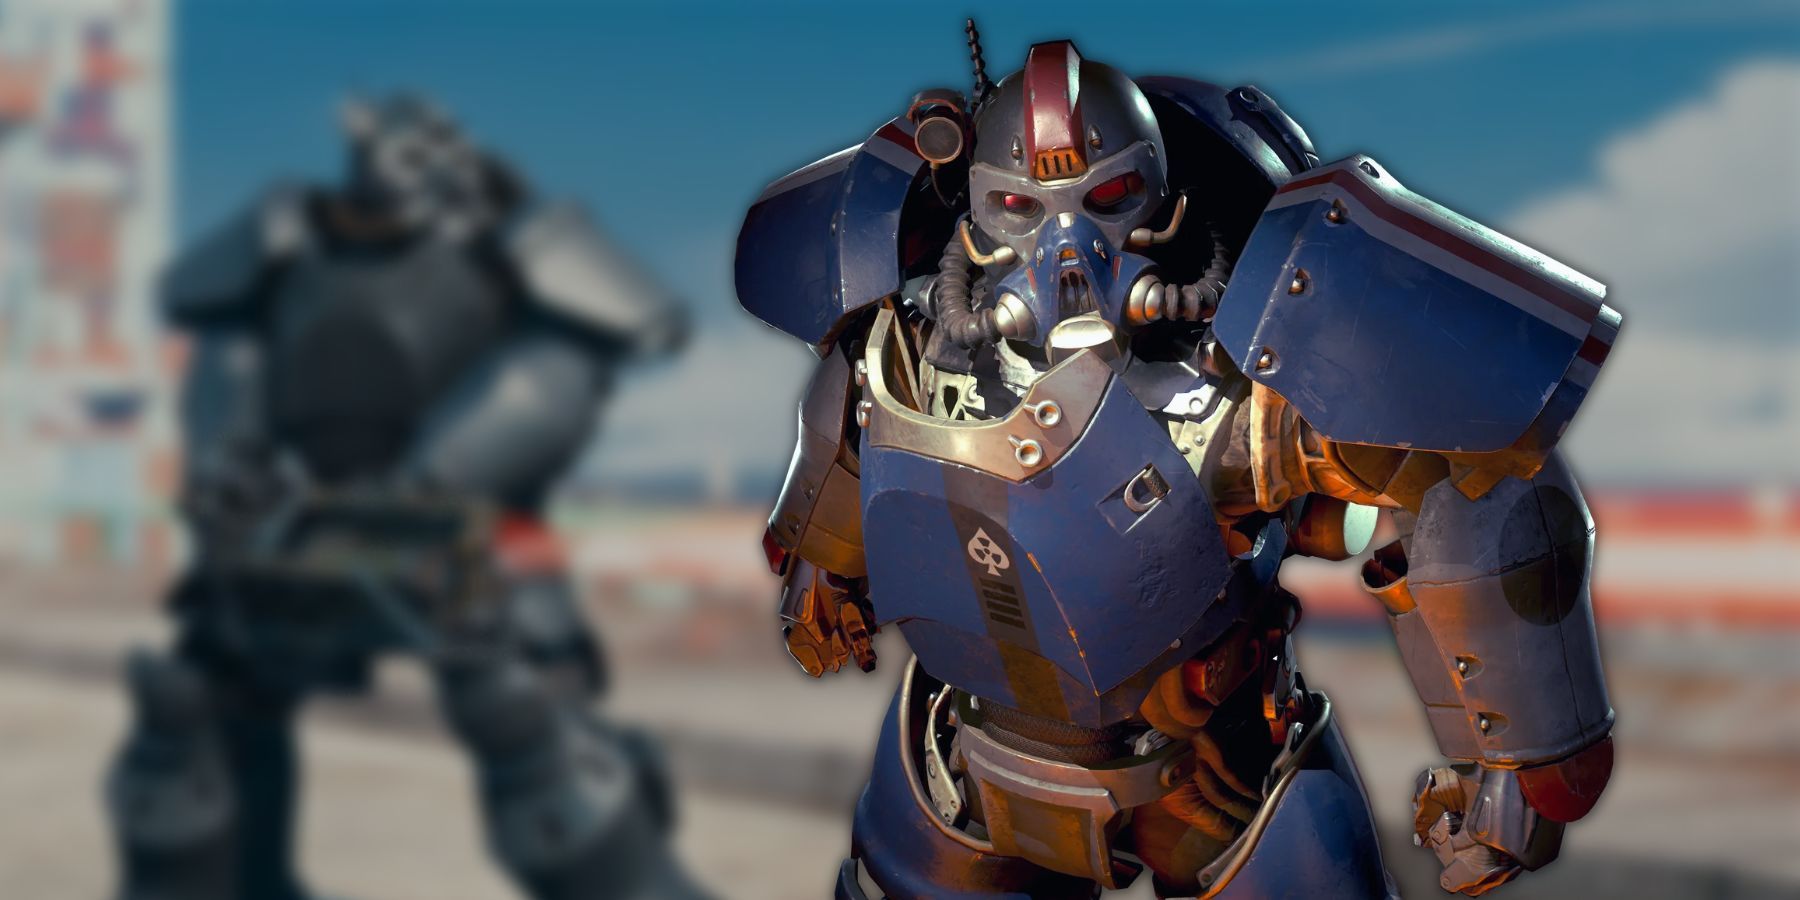 The Best Power Armor in Fallout 76